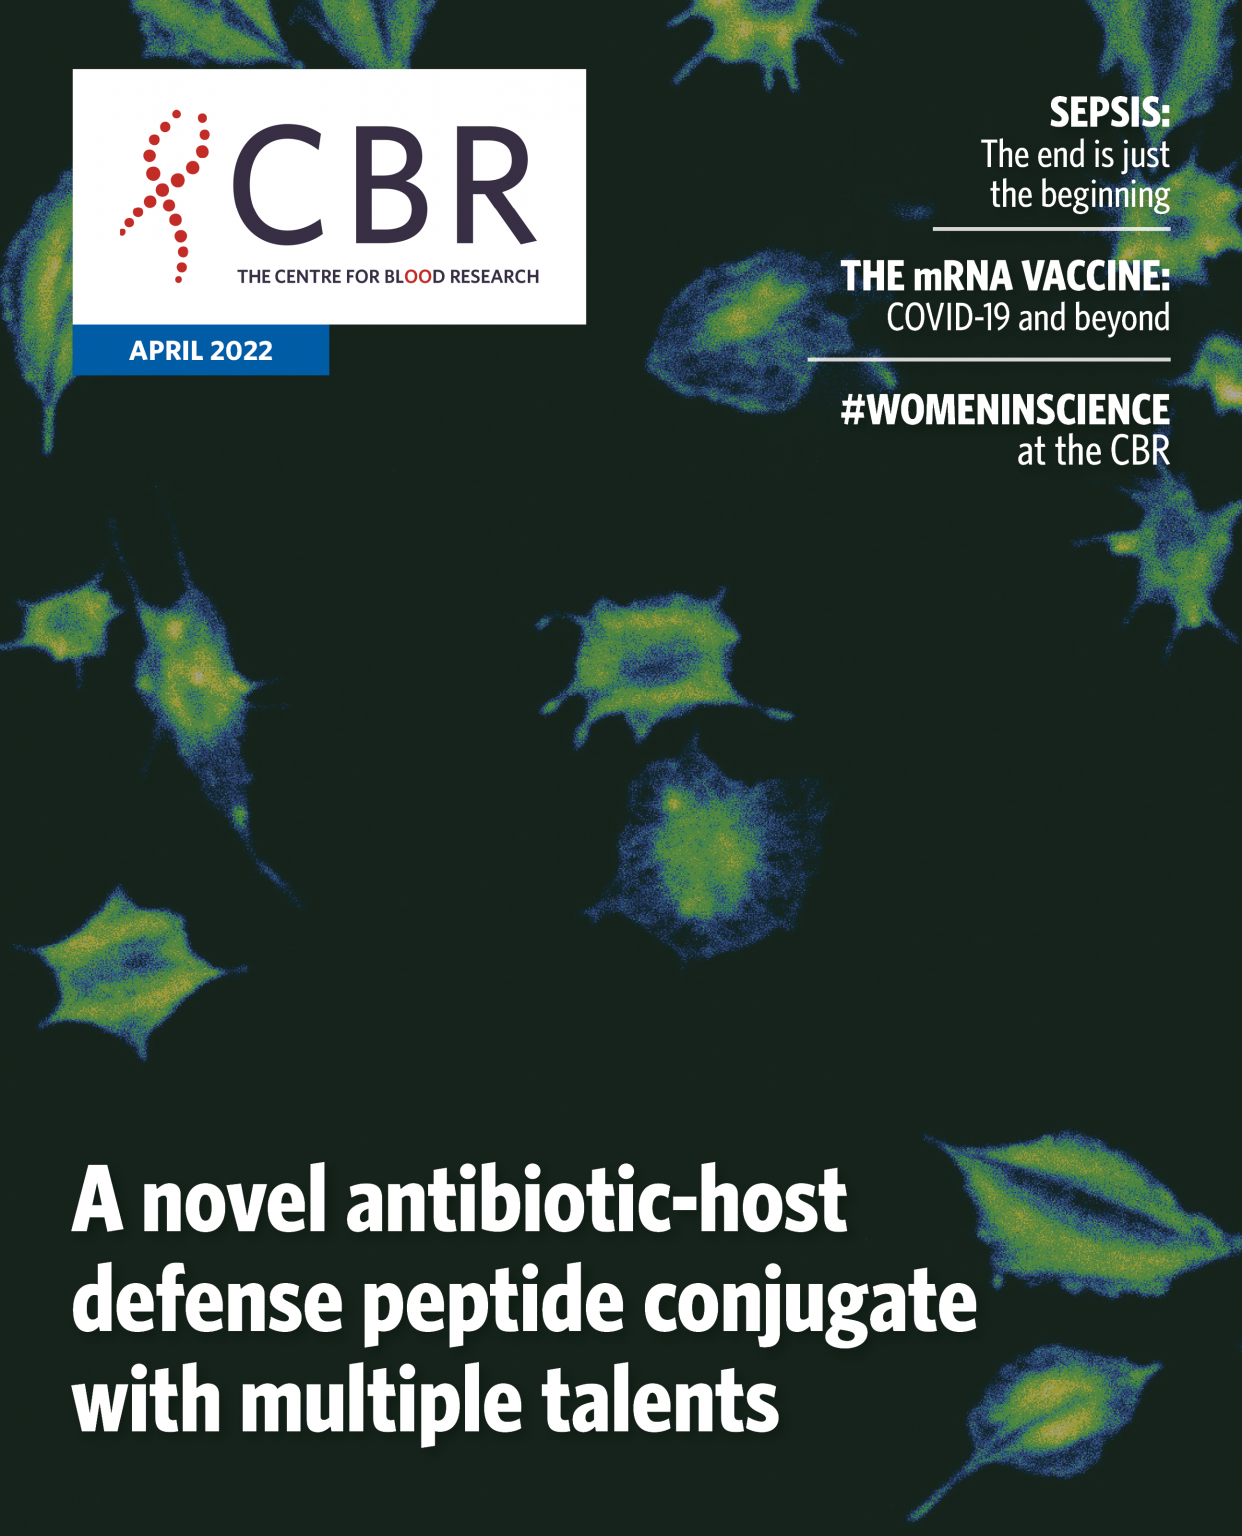 Platelets activating their defense mechanisms. Cover image of the CBR Magazine April 2022 issue.